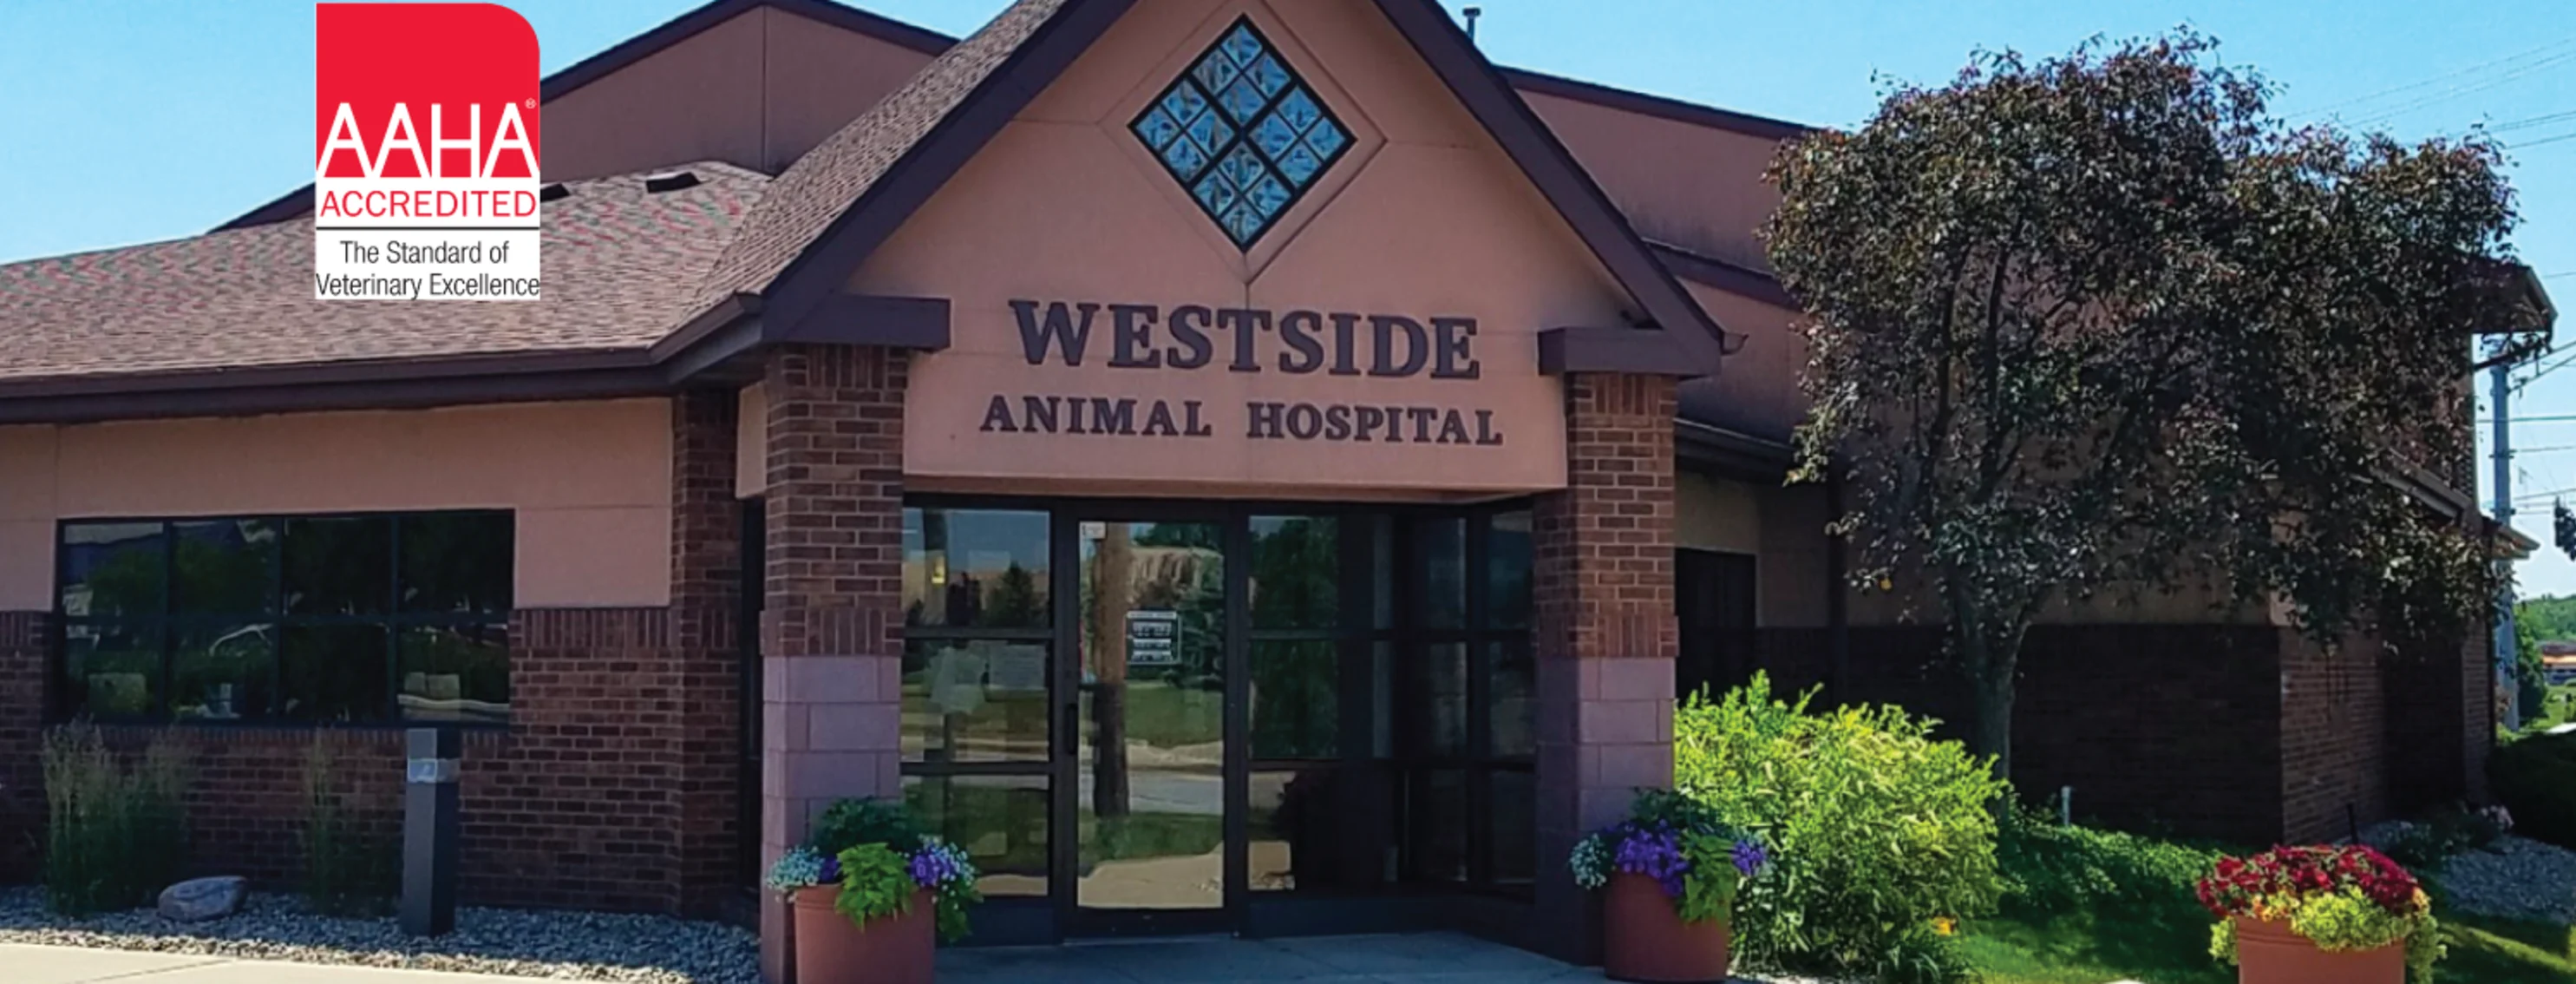 the front exterior of Westside Animal Hospital